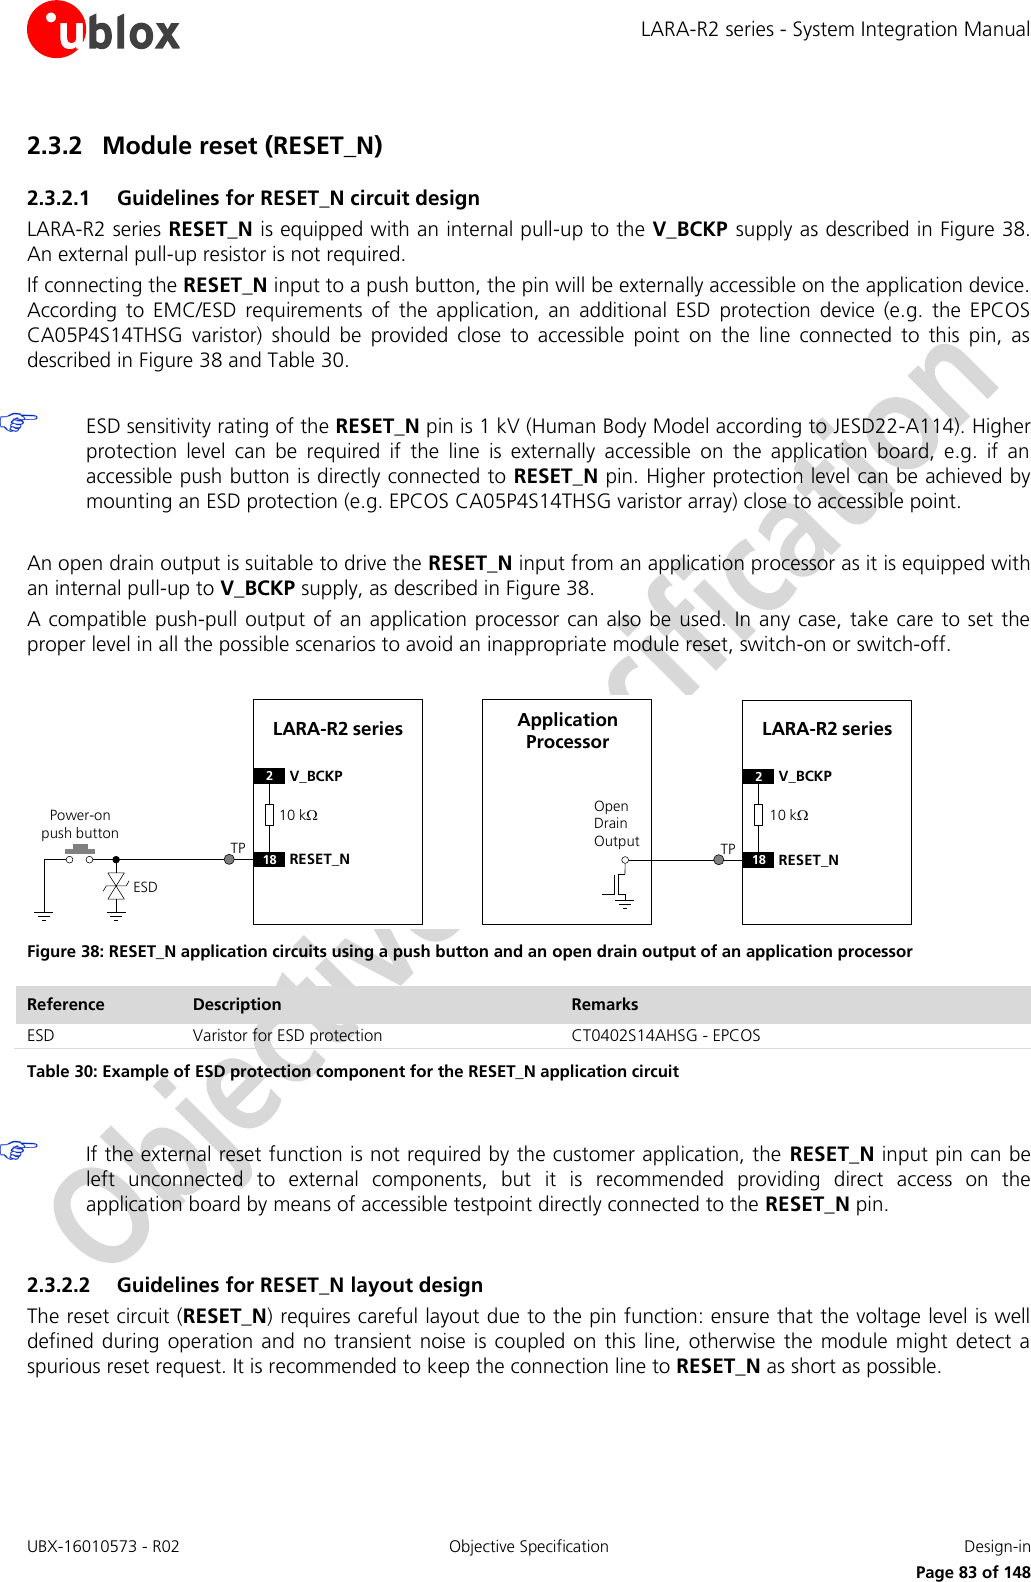 LARA-R2 series - System Integration Manual UBX-16010573 - R02  Objective Specification  Design-in     Page 83 of 148 2.3.2 Module reset (RESET_N) 2.3.2.1 Guidelines for RESET_N circuit design LARA-R2 series RESET_N is equipped with an internal pull-up to the V_BCKP supply as described in Figure 38. An external pull-up resistor is not required. If connecting the RESET_N input to a push button, the pin will be externally accessible on the application device. According  to  EMC/ESD  requirements  of  the  application,  an  additional  ESD  protection  device  (e.g.  the  EPCOS CA05P4S14THSG  varistor)  should  be  provided  close  to  accessible  point  on  the  line  connected  to  this  pin,  as described in Figure 38 and Table 30.   ESD sensitivity rating of the RESET_N pin is 1 kV (Human Body Model according to JESD22-A114). Higher protection  level  can  be  required  if  the  line  is  externally  accessible  on  the  application  board,  e.g.  if  an accessible push button is directly connected to RESET_N pin. Higher protection level can be achieved by mounting an ESD protection (e.g. EPCOS CA05P4S14THSG varistor array) close to accessible point.  An open drain output is suitable to drive the RESET_N input from an application processor as it is equipped with an internal pull-up to V_BCKP supply, as described in Figure 38. A compatible  push-pull output  of  an application  processor can also be used. In  any  case, take care to set the proper level in all the possible scenarios to avoid an inappropriate module reset, switch-on or switch-off.  LARA-R2 series2V_BCKP18 RESET_NPower-on push buttonESDOpen Drain OutputApplication Processor LARA-R2 series2V_BCKP18 RESET_NTP TP10 k10 k Figure 38: RESET_N application circuits using a push button and an open drain output of an application processor Reference Description Remarks ESD Varistor for ESD protection CT0402S14AHSG - EPCOS Table 30: Example of ESD protection component for the RESET_N application circuit   If the external reset function is not required by the customer application, the  RESET_N input pin can be left  unconnected  to  external  components,  but  it  is  recommended  providing  direct  access  on  the application board by means of accessible testpoint directly connected to the RESET_N pin.  2.3.2.2 Guidelines for RESET_N layout design The reset circuit (RESET_N) requires careful layout due to the pin function: ensure that the voltage level is well defined during  operation and no  transient noise  is coupled on this line,  otherwise  the  module  might  detect a spurious reset request. It is recommended to keep the connection line to RESET_N as short as possible.  